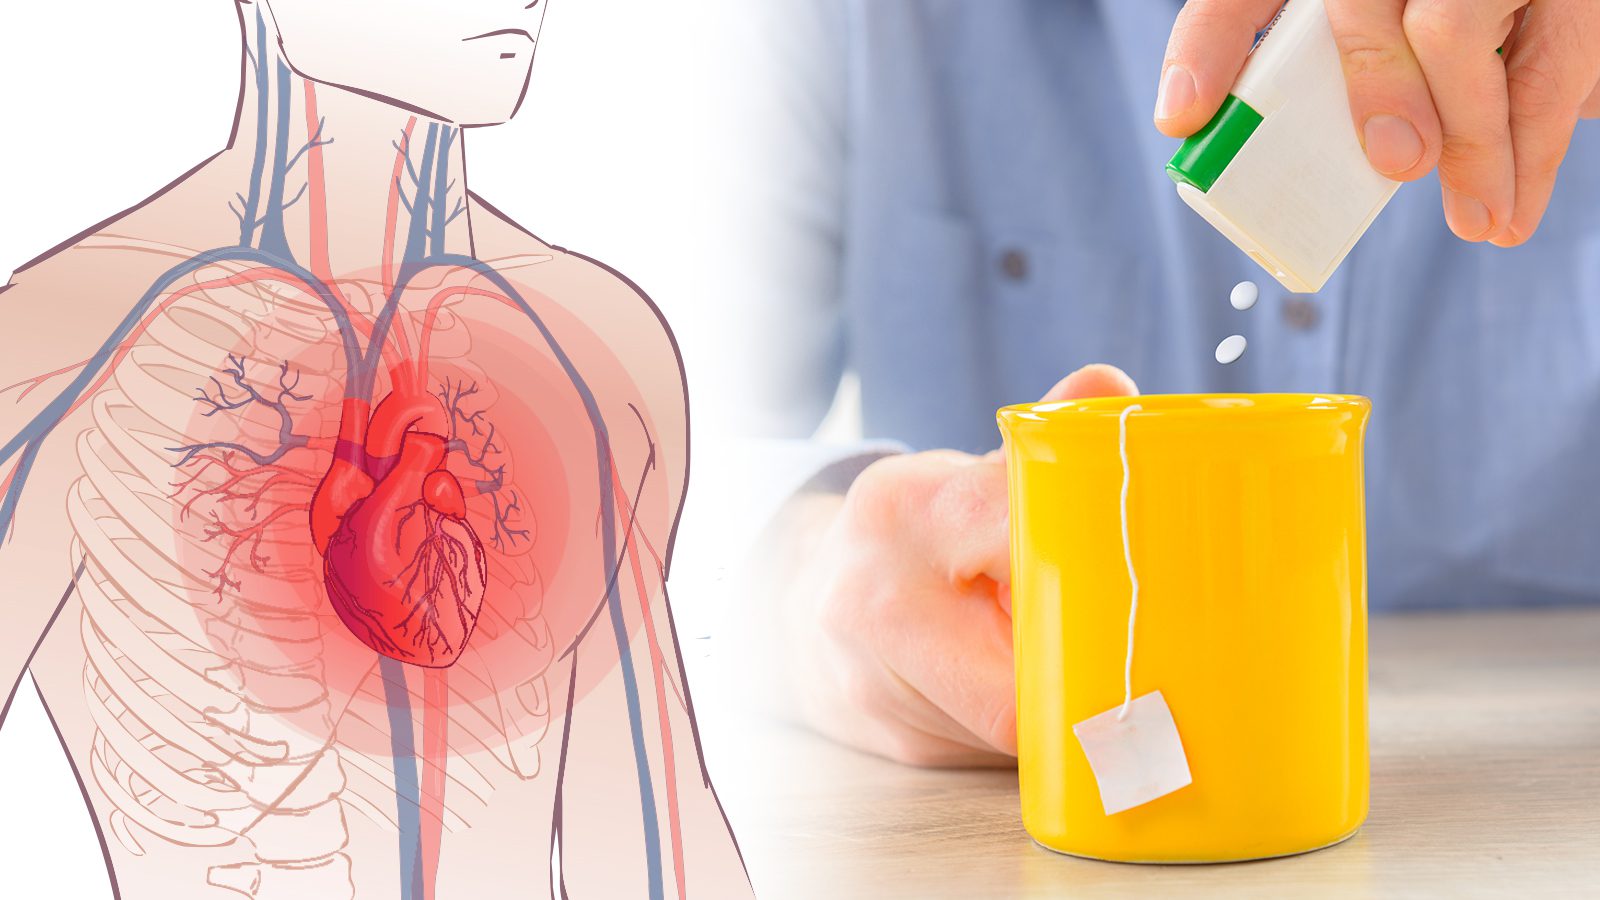 Researchers Reveal Artificial Sweeteners Can Raise Risk of Heart Attack